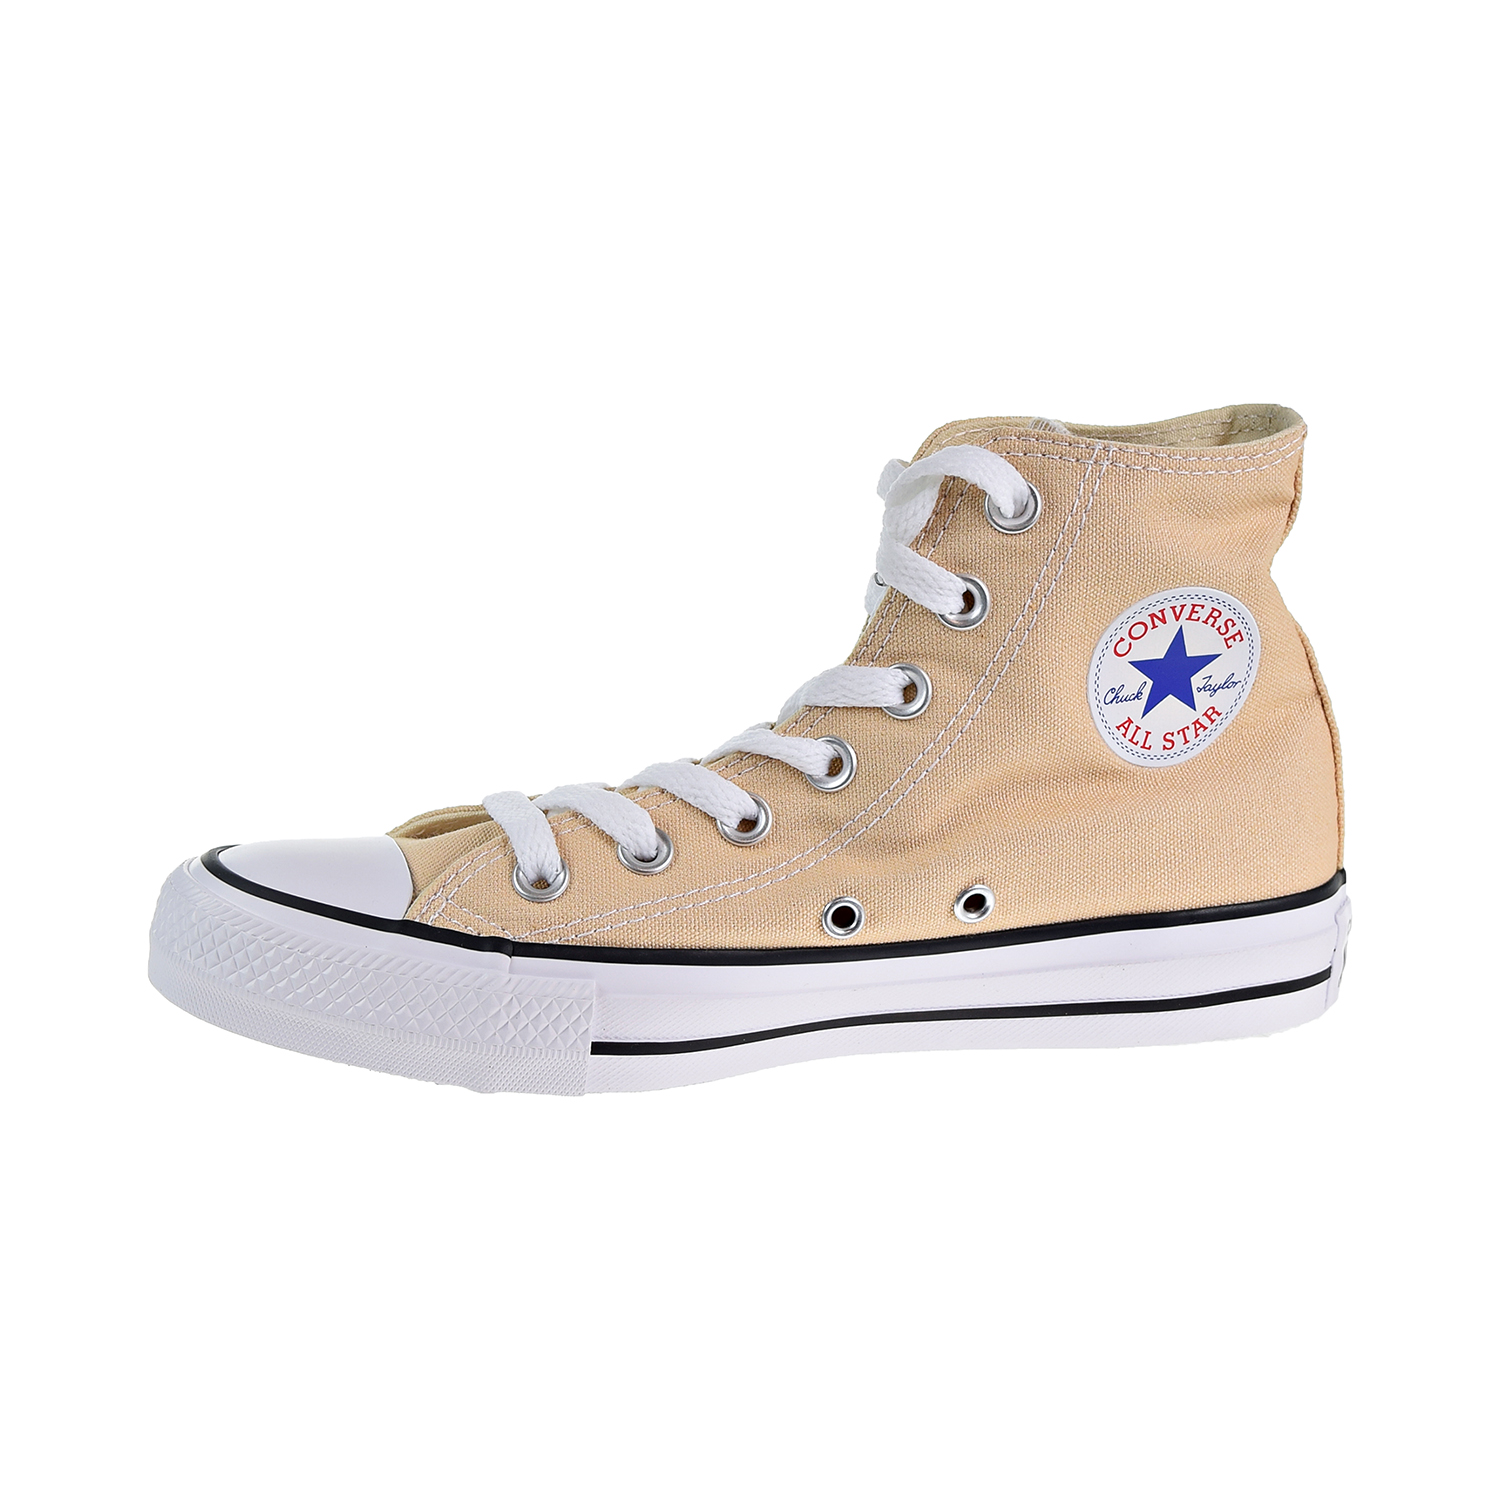 Converse Chuck Taylor All Star Hi Men's/Big Kids' Shoes Raw Ginger 160456f - image 4 of 6